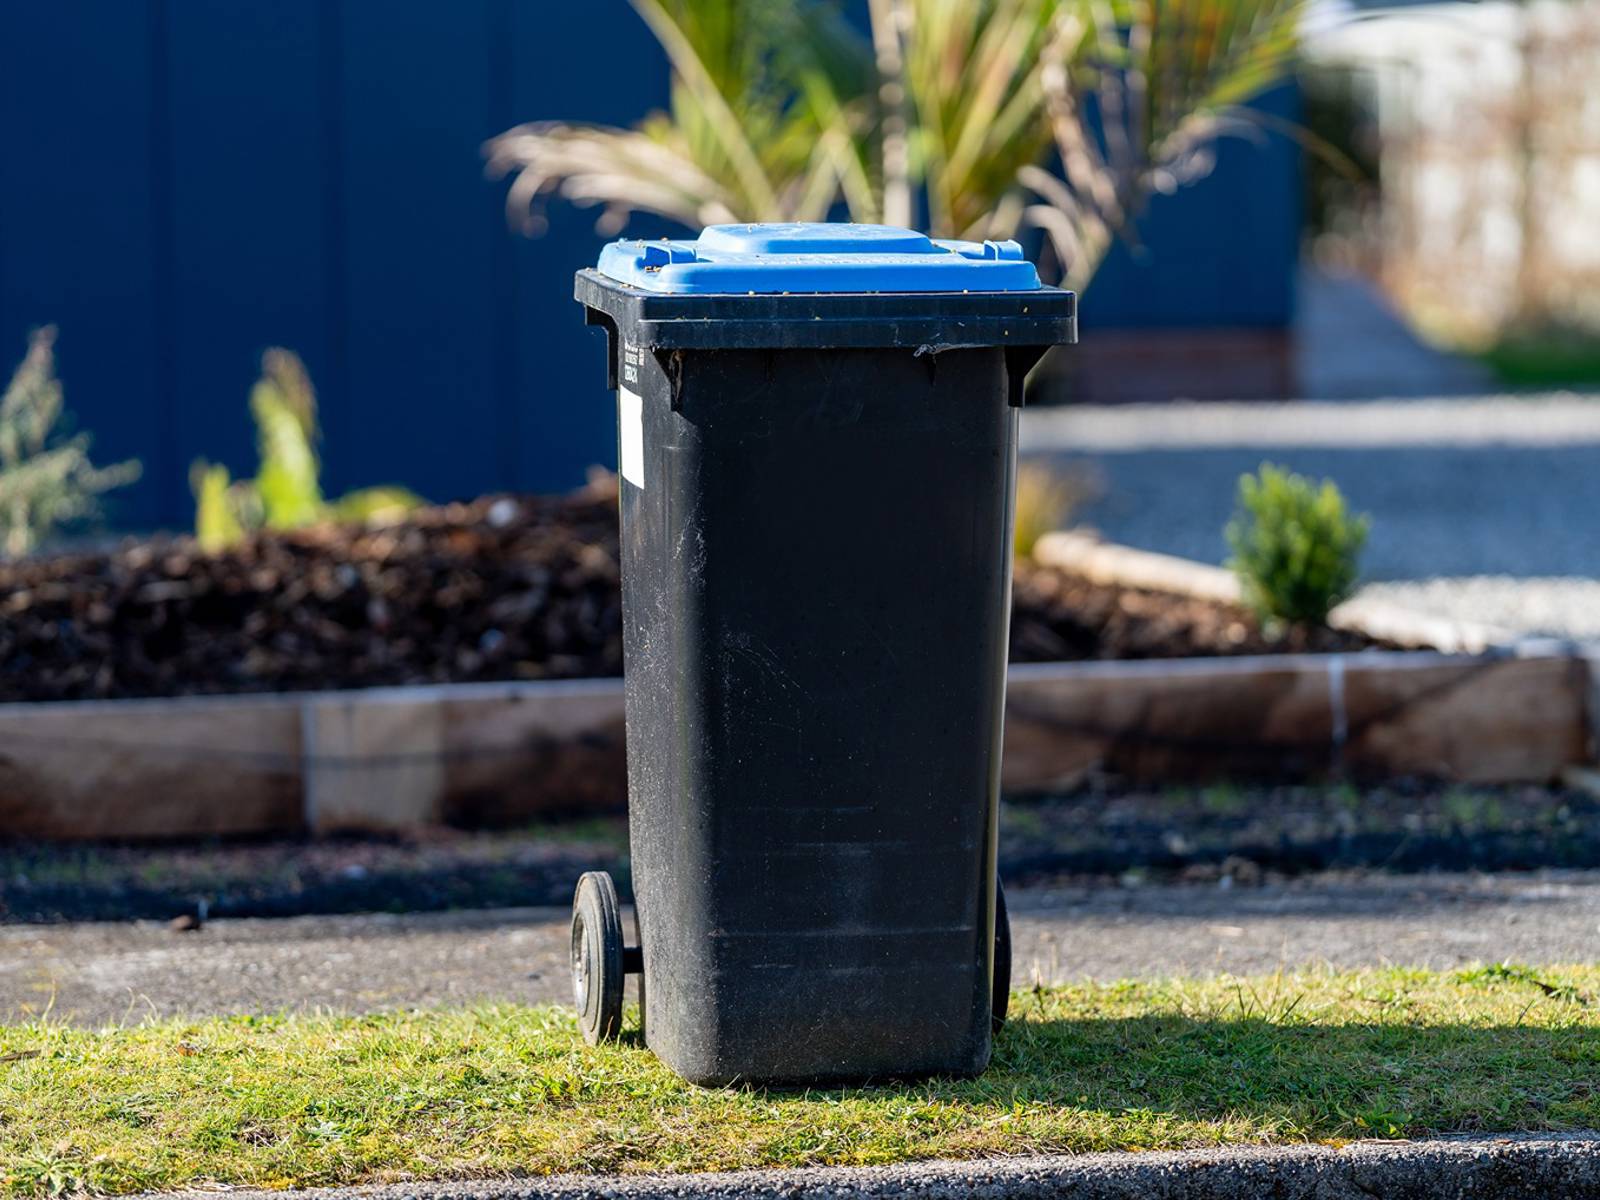 New waste management system 2025 | Buller District Council